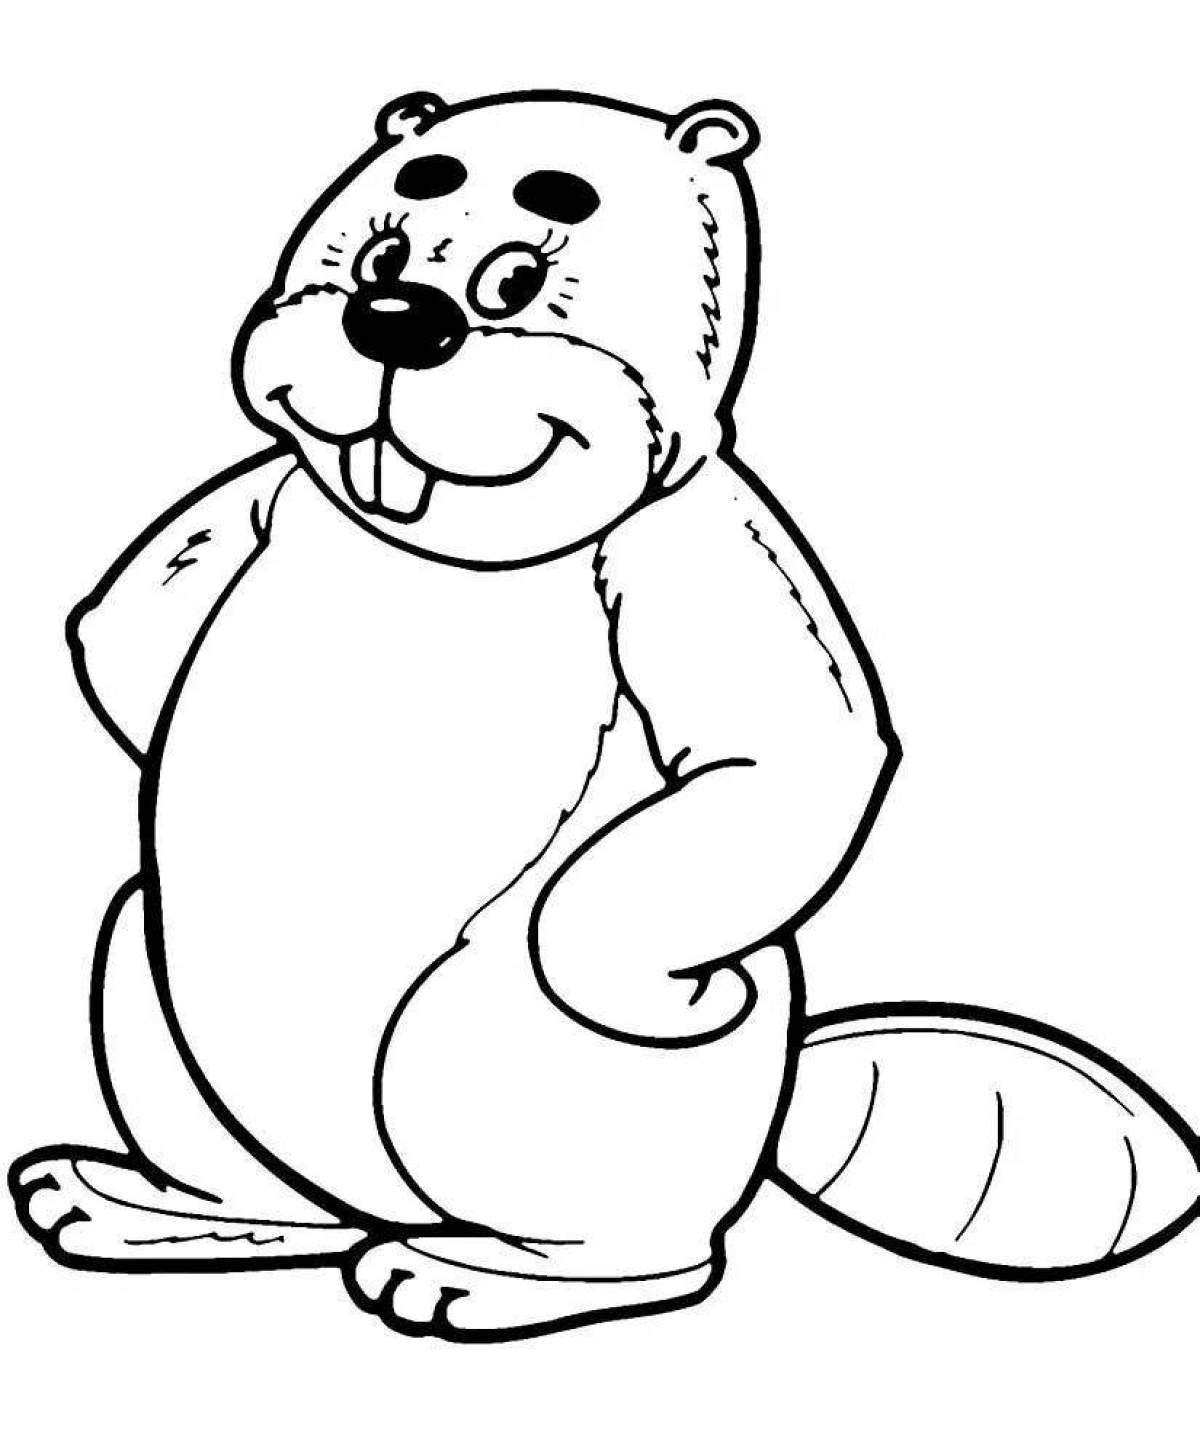 Colorful beaver coloring page for kids